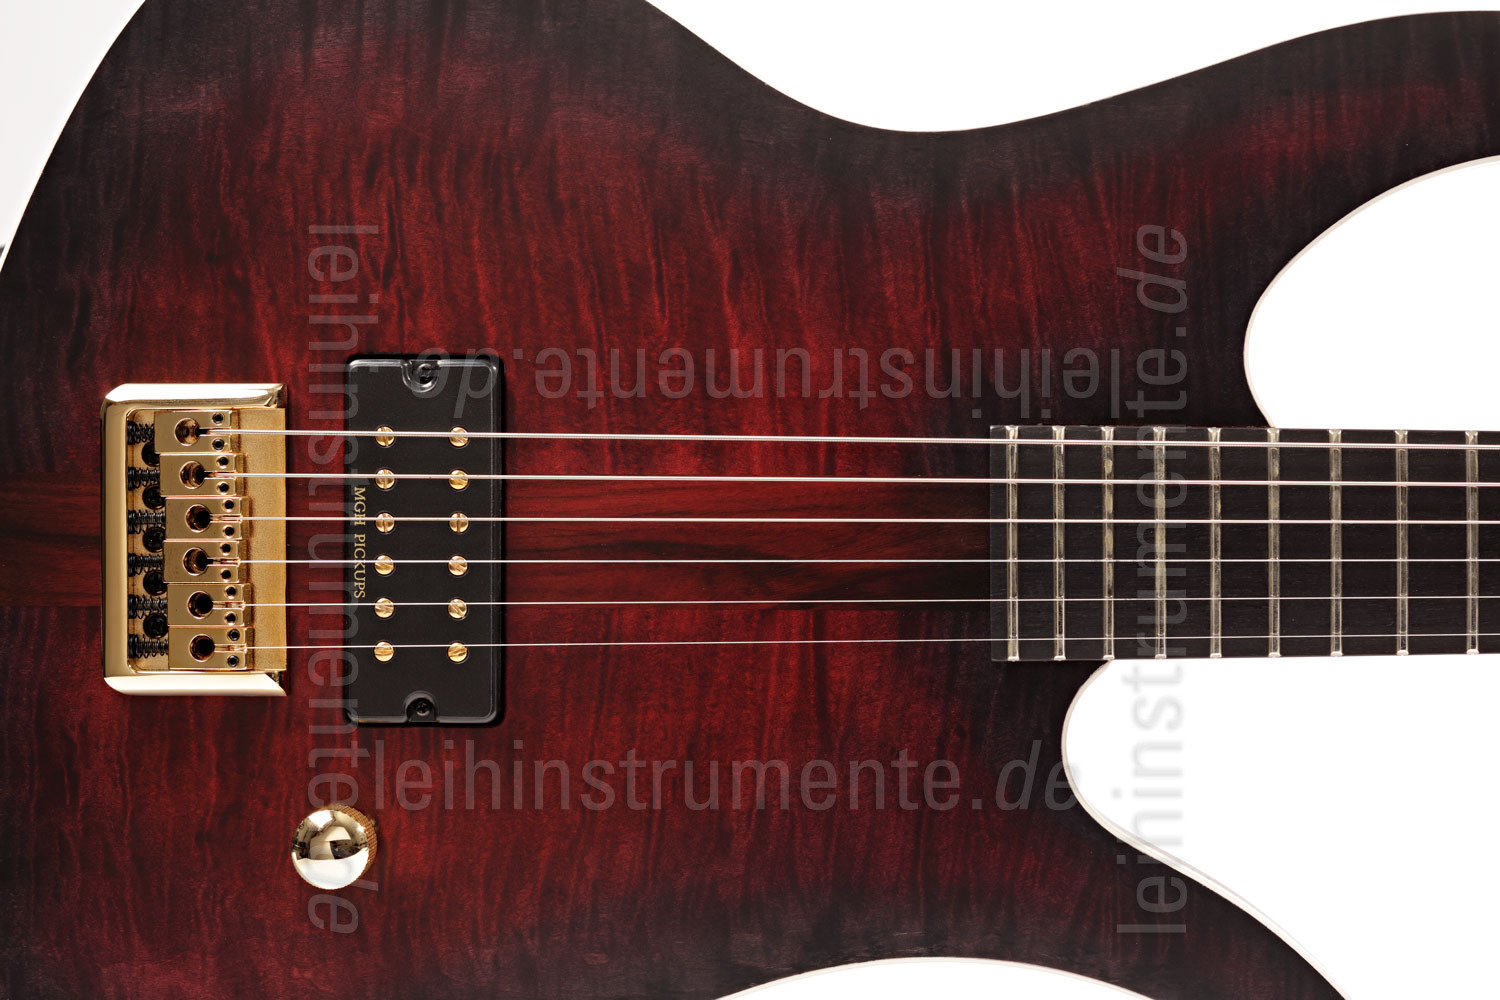 to article description / price Electric MGH GUITARS Blizzard Beast Premium Deluxe - black cherry burst + softcase - made in Germany